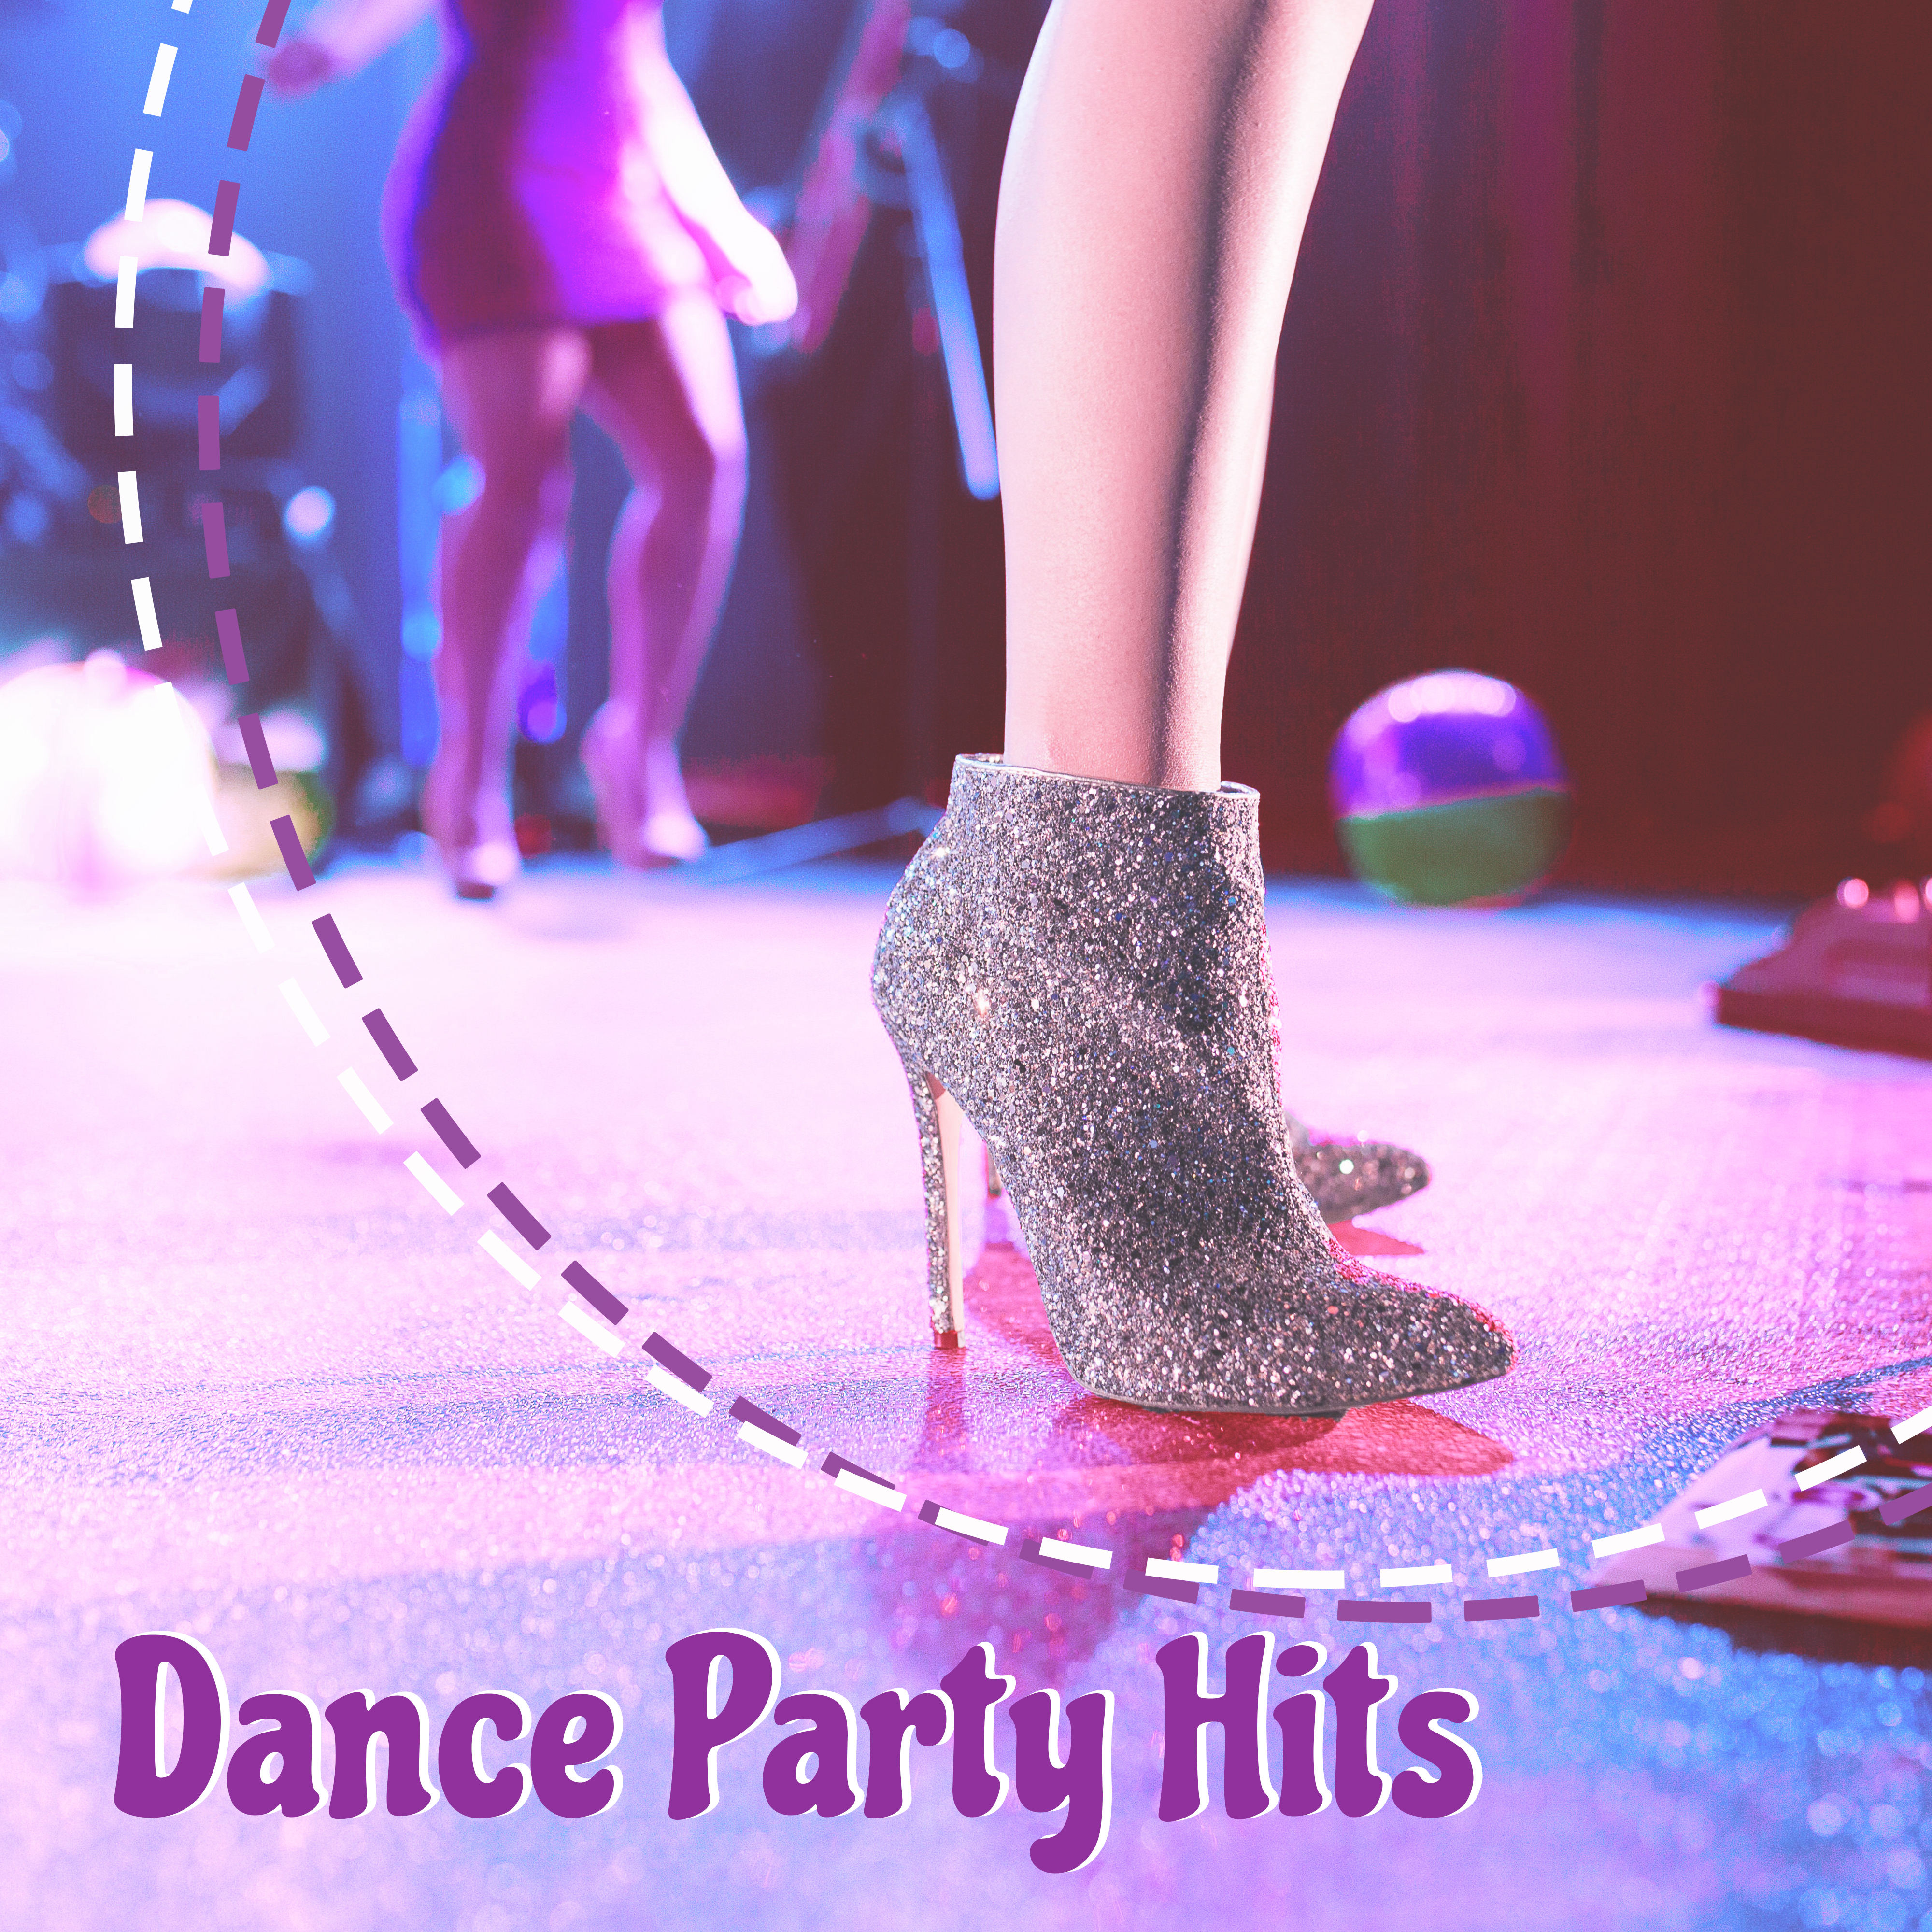 Dance Party Hits – Sexy Chill, Crazy Holiday, Party Time, Sensual Music, Best Chill Out Music, Ibiza Lounge, Dance Party